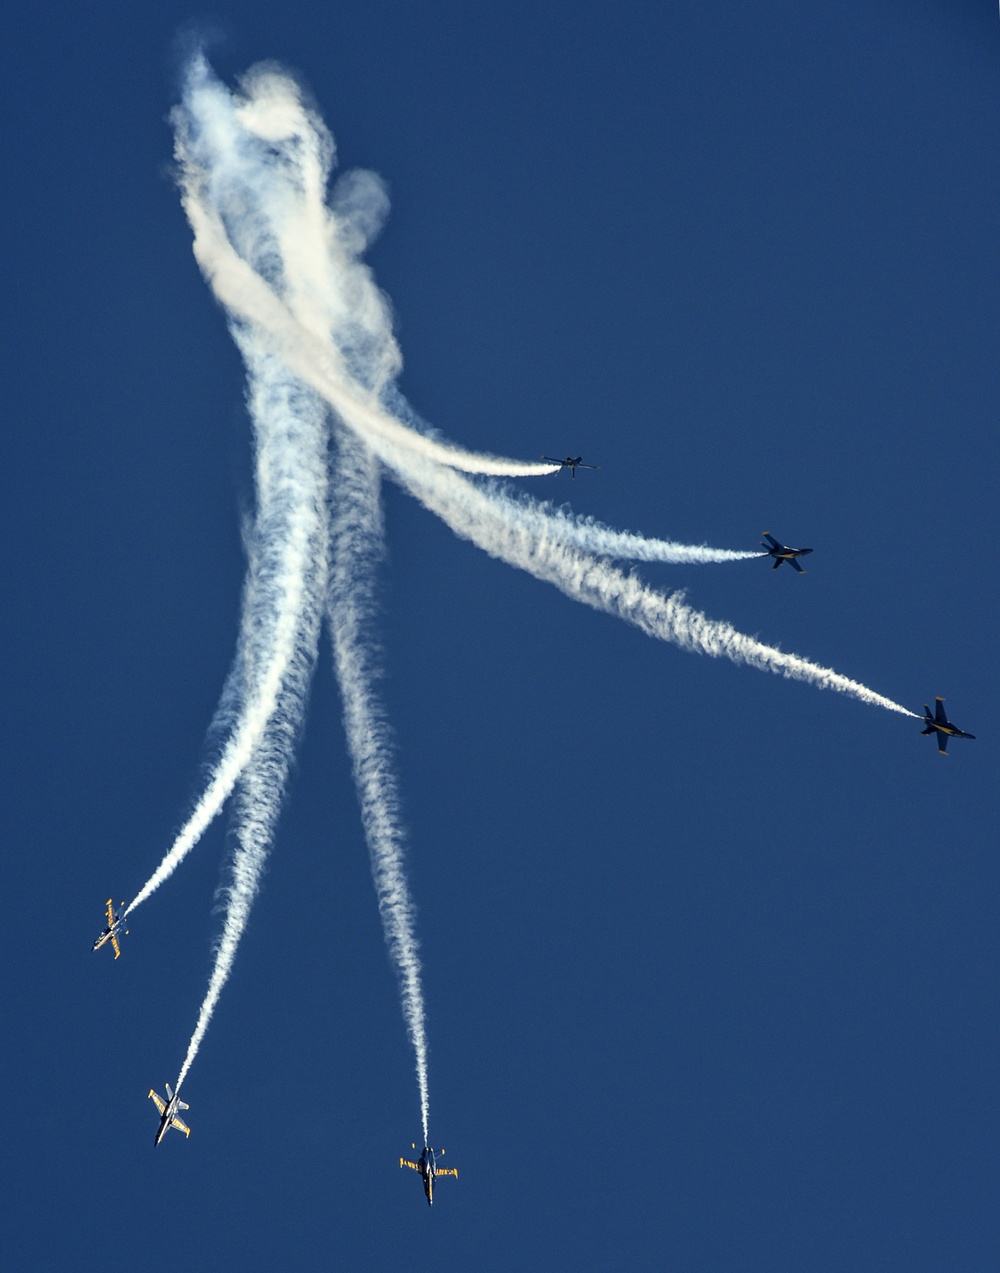 Wings Over the Pacific Air Show